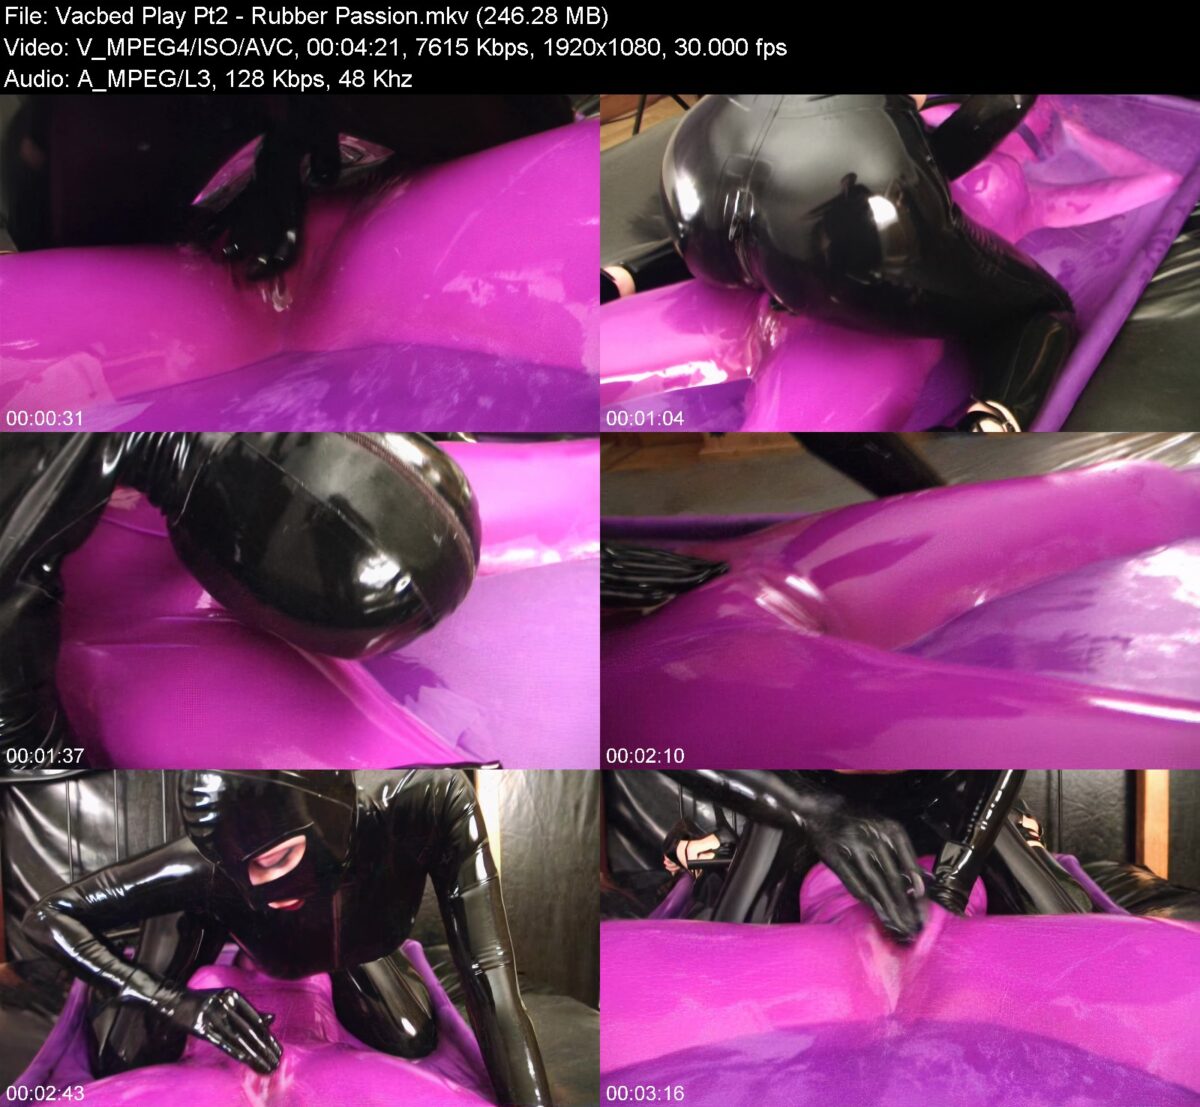 Vacbed Play Pt2 in Rubber Passion